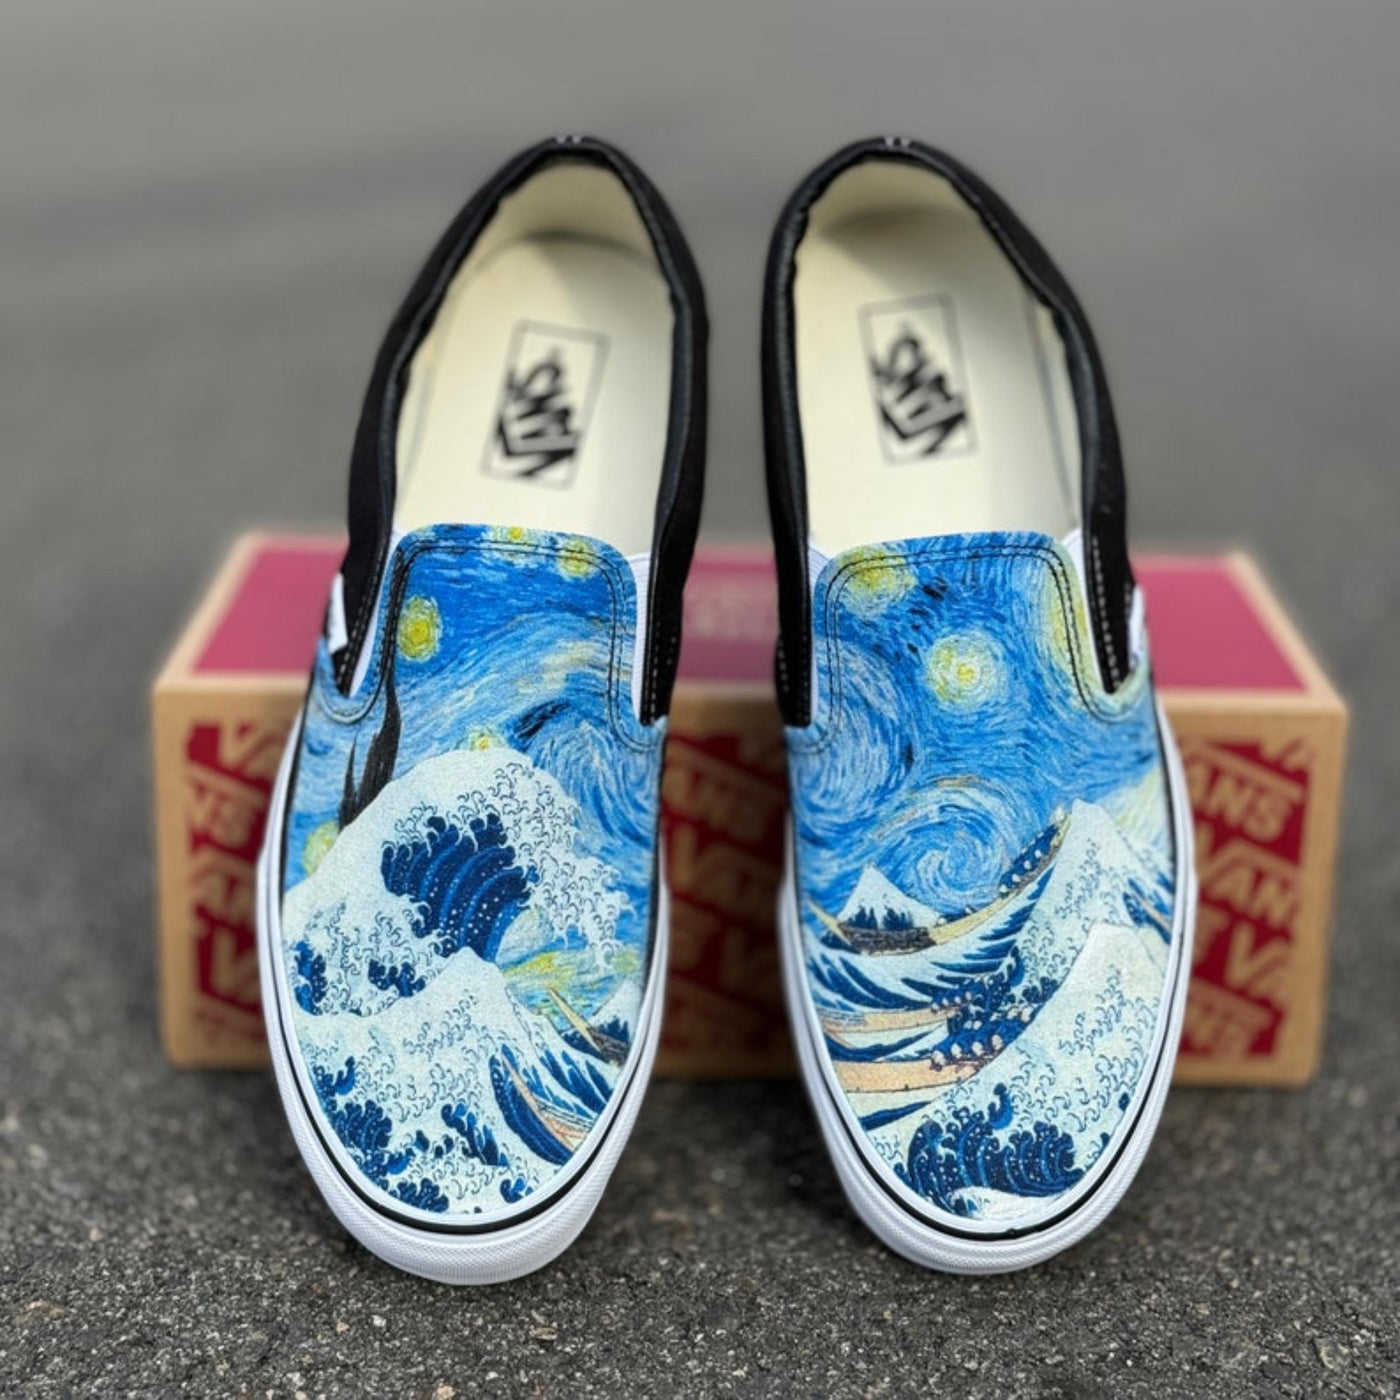 The Great Wave and Vincent Van Gogh Starry Night